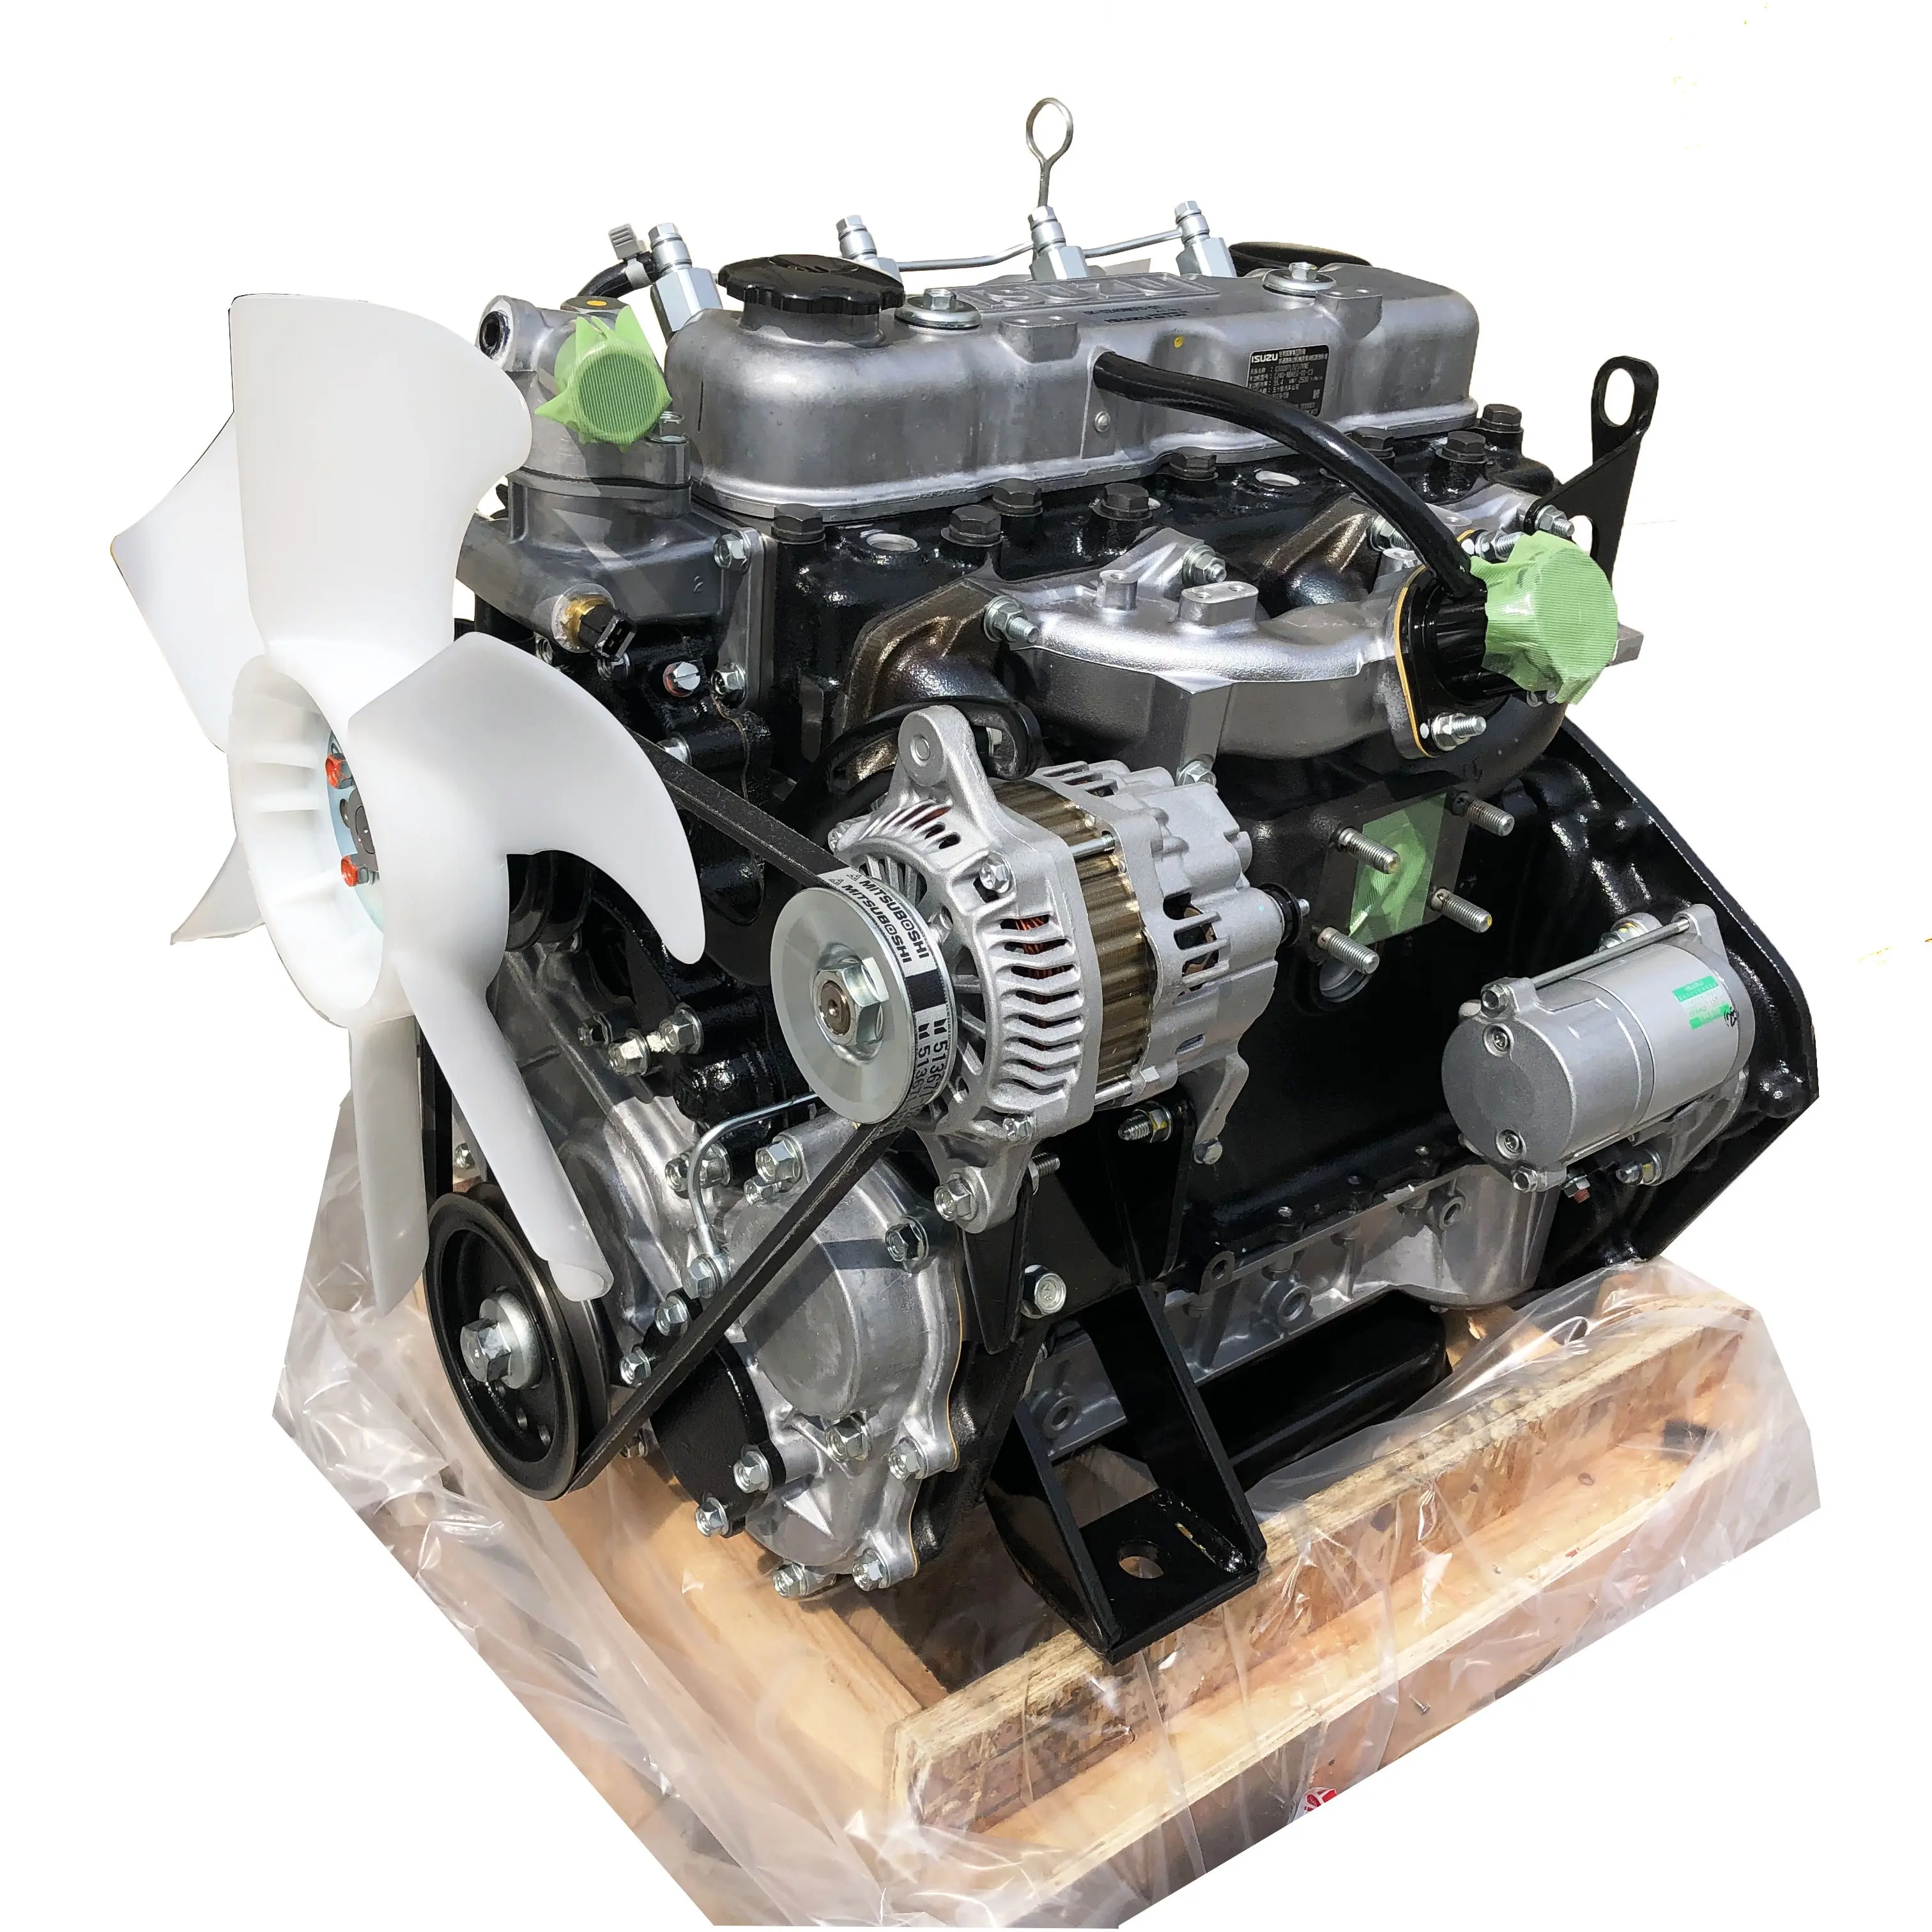 Brand New ISUZU C240 Motor C240 Compete Engine Assembly For Forklift 3 Ton Machinery Engines